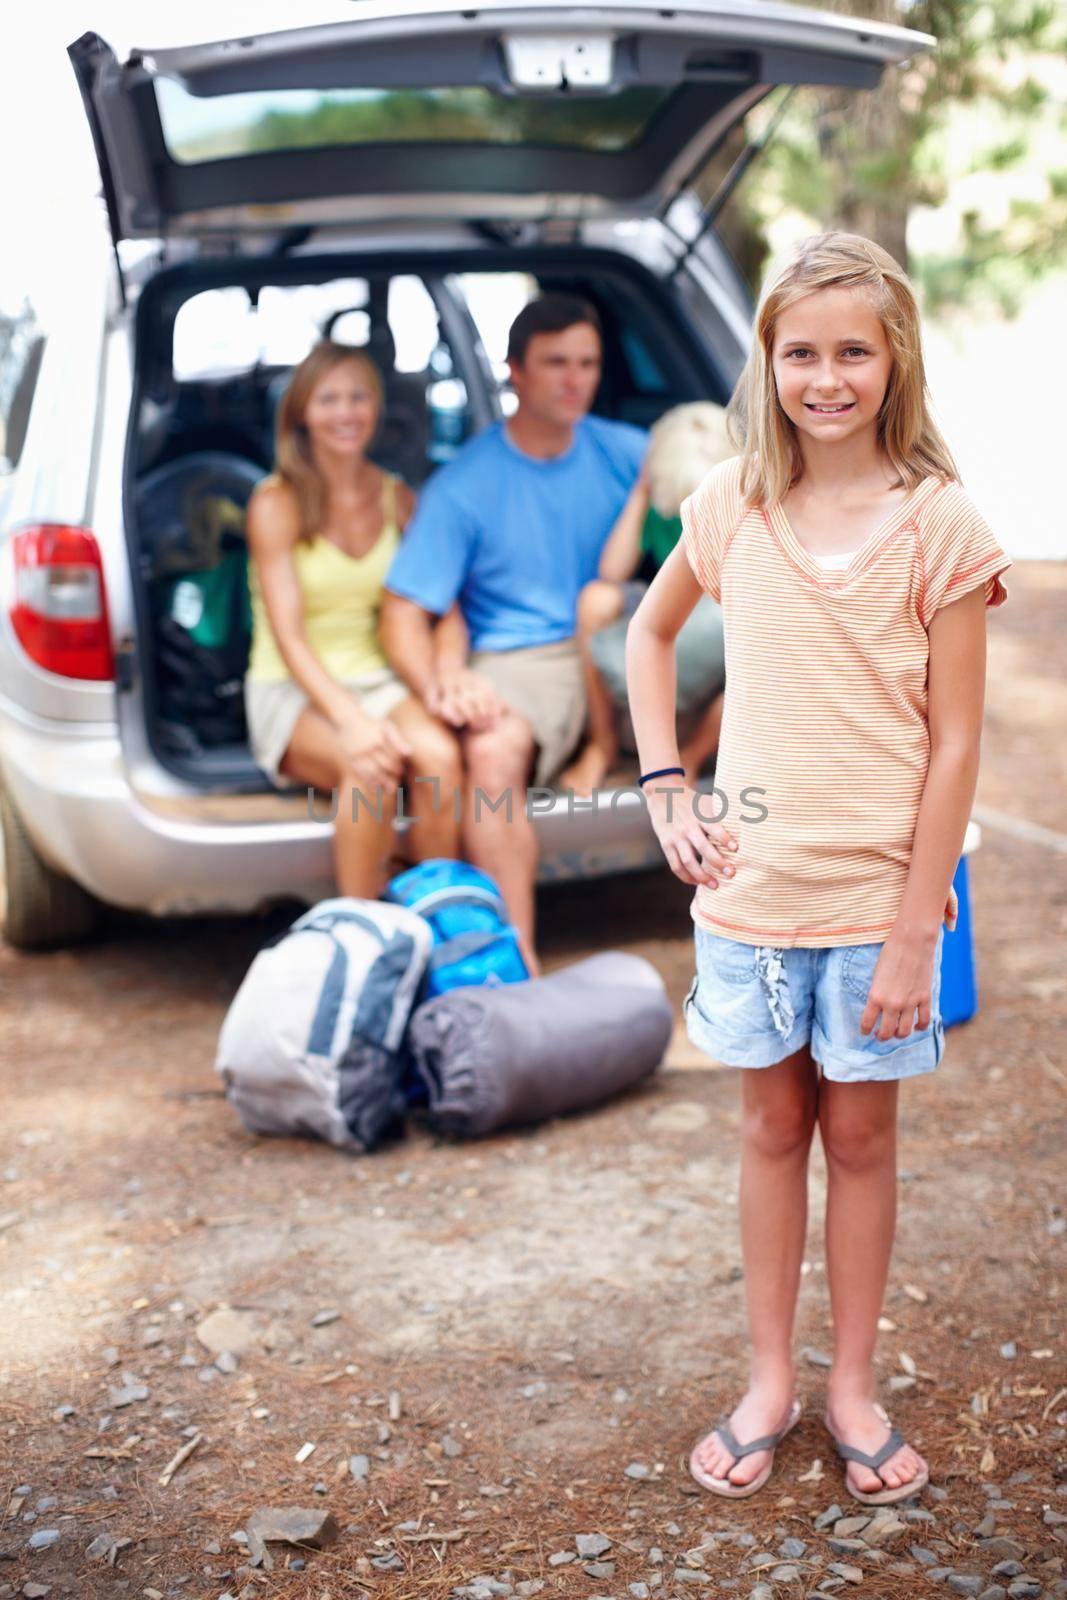 Young girl smiling. Full length of young girl smiling with family sitting in a car